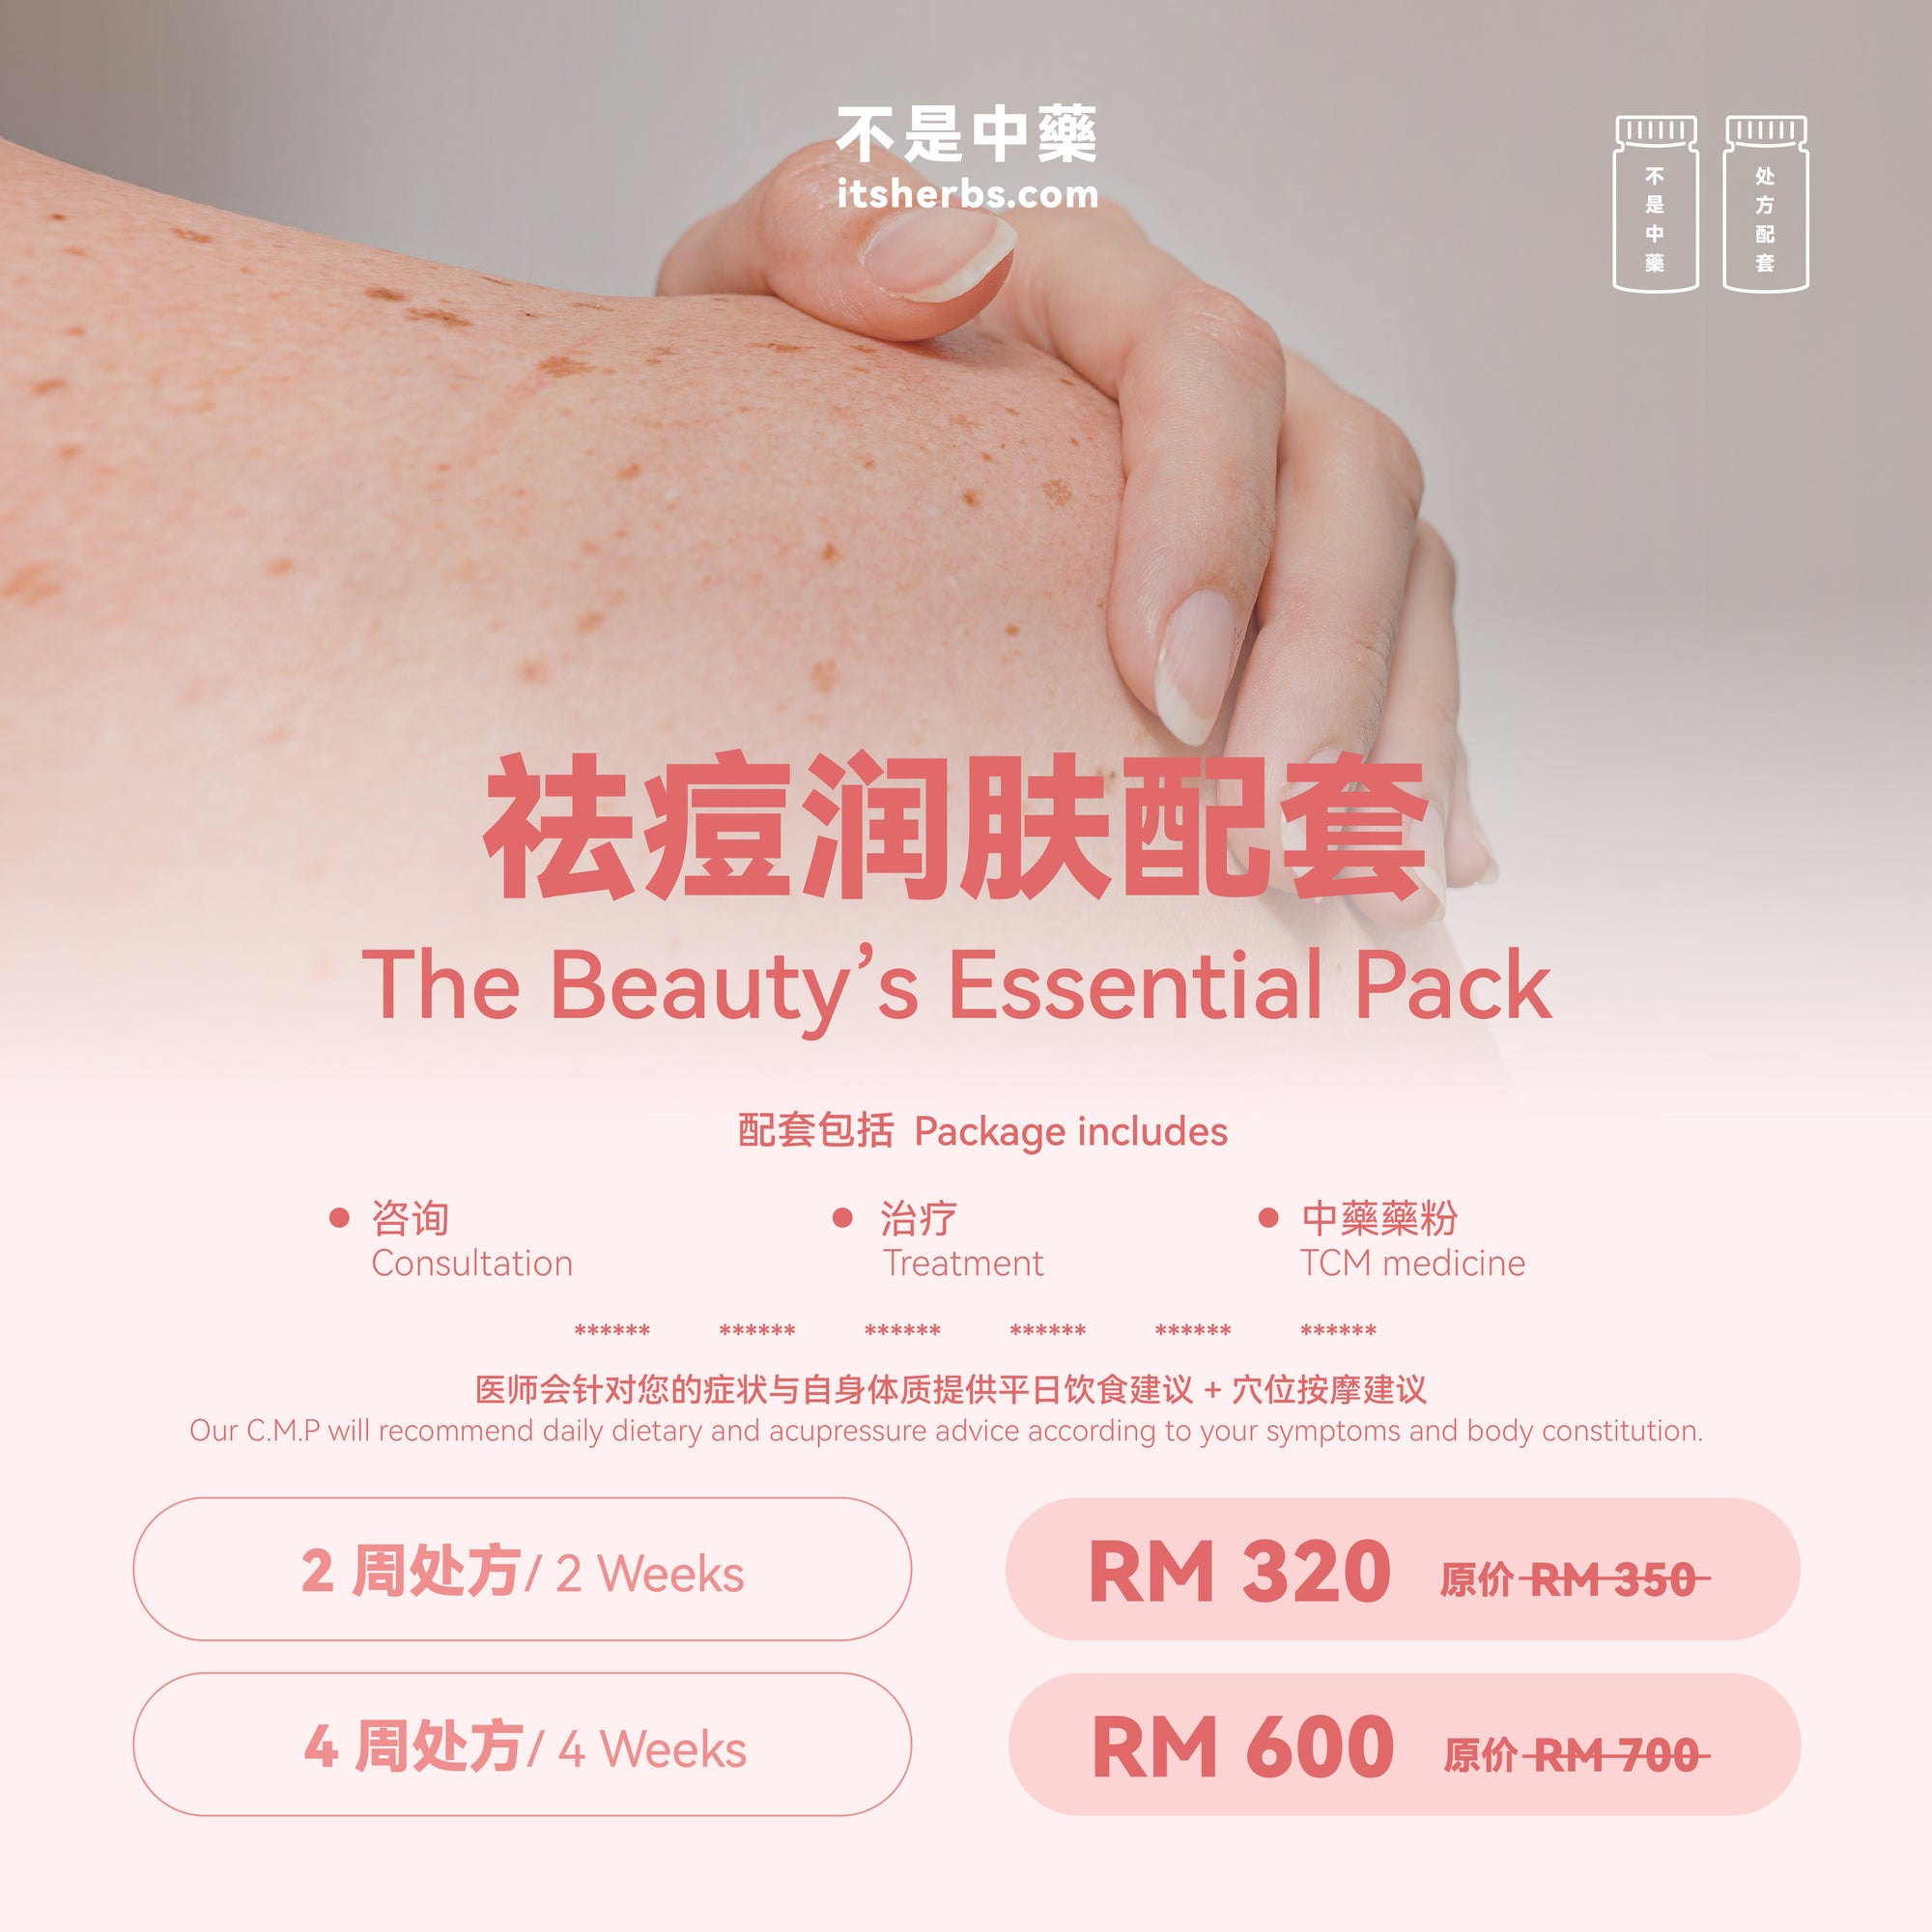 The Beauty’s Essential Pack